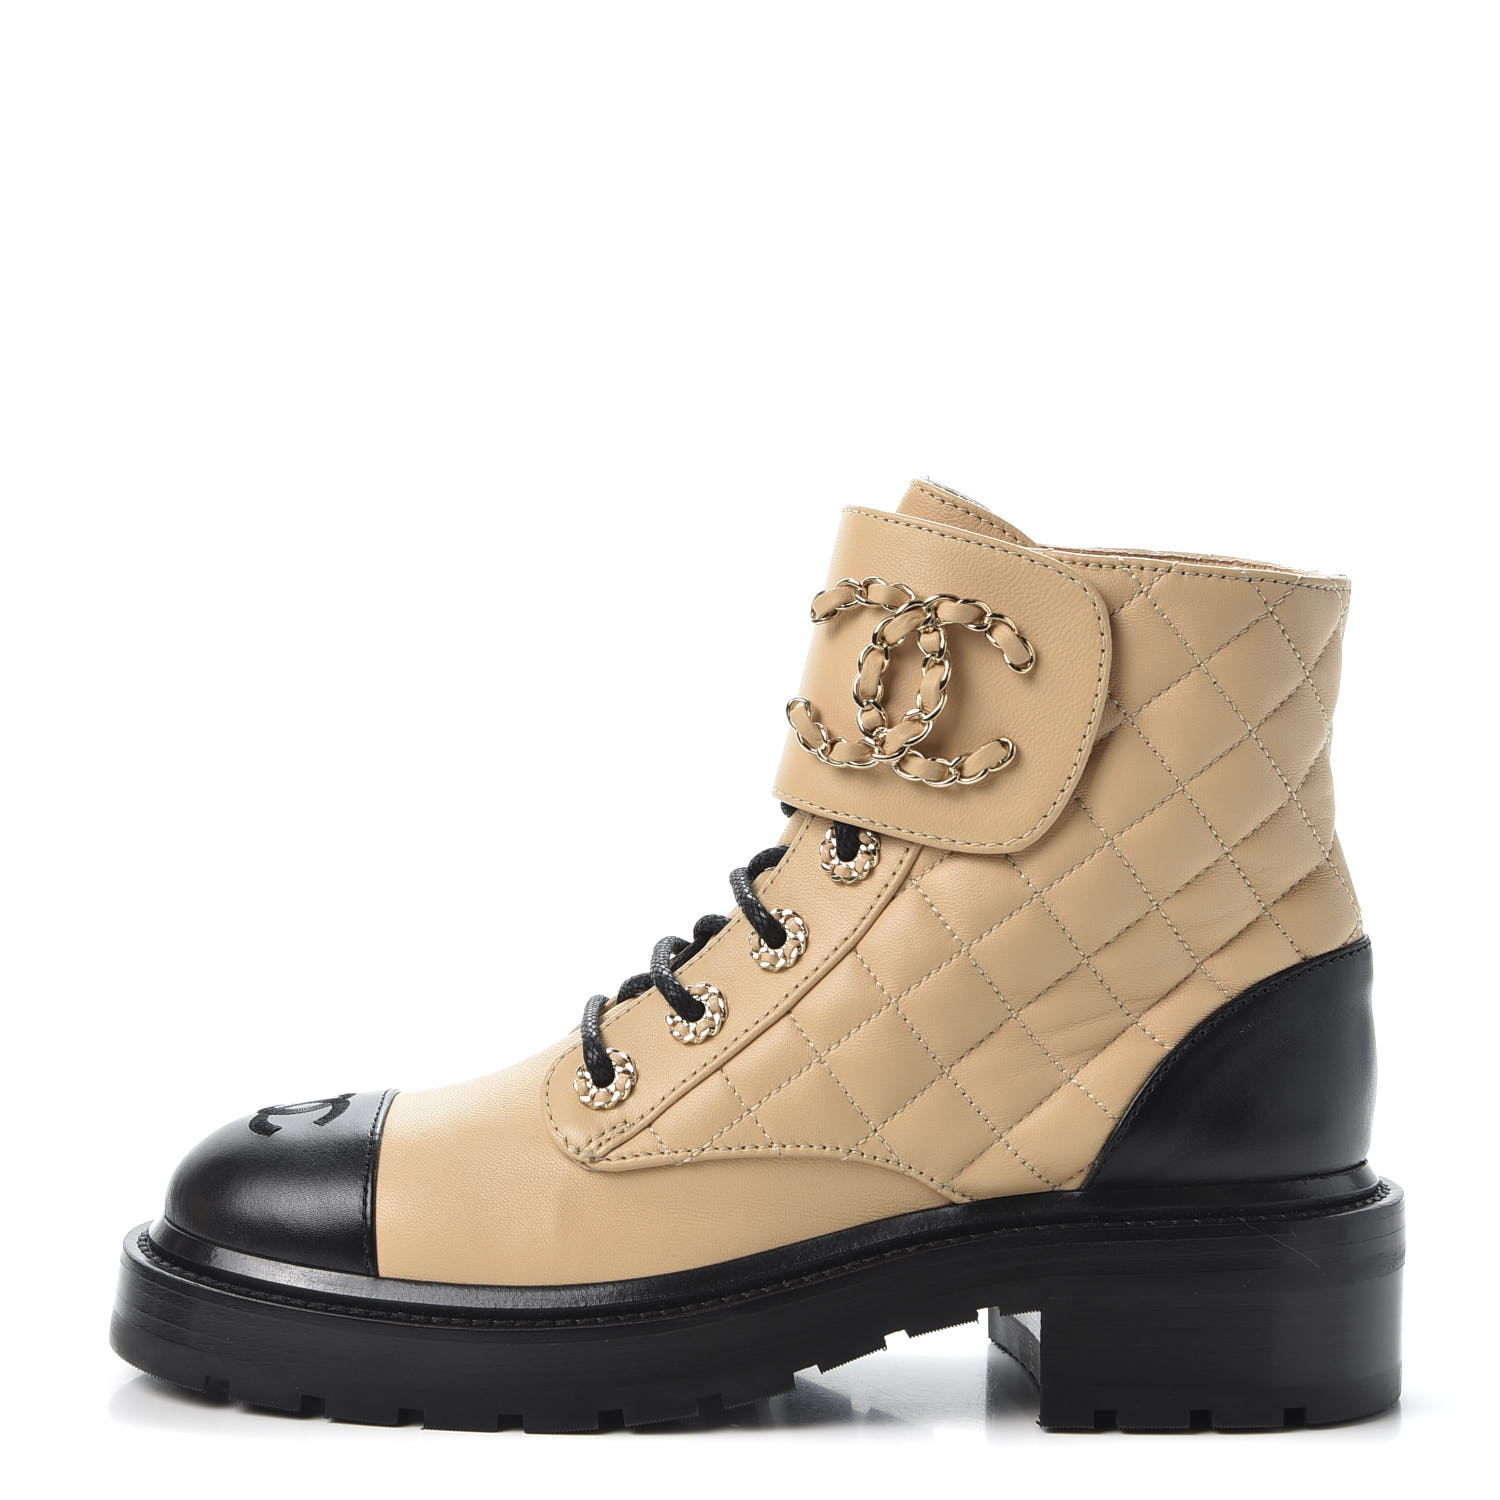 CHANEL Calfskin Quilted Lace Up Combat Boots 36.5 Beige Black 582909 ...